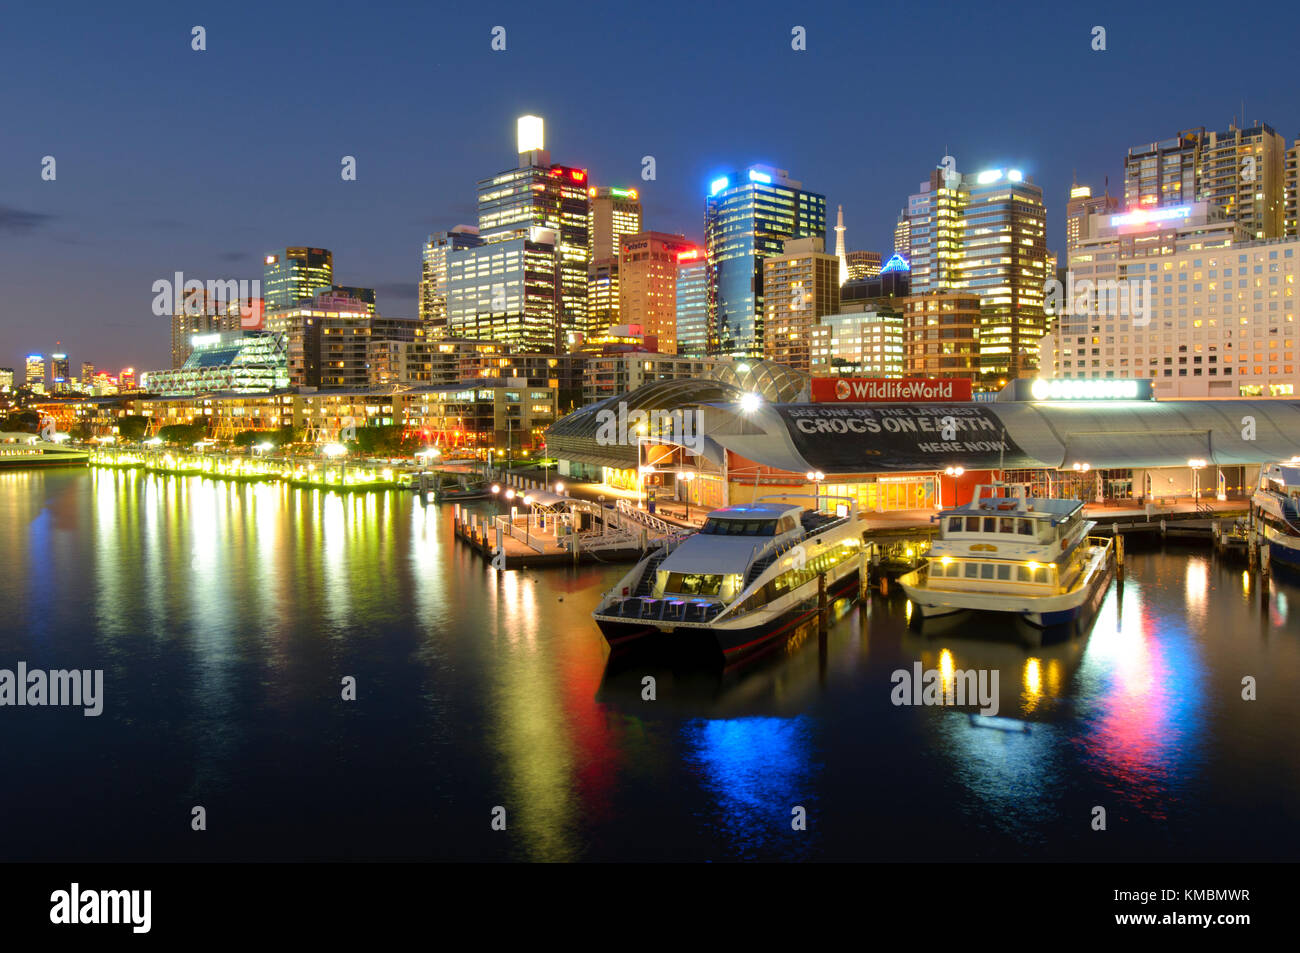 Darling Harbour at Night, Sydney, New South Wales, Australia. Sydney CBD (downtown) after sunset is highlighted with lights and neon signs. Stock Photo